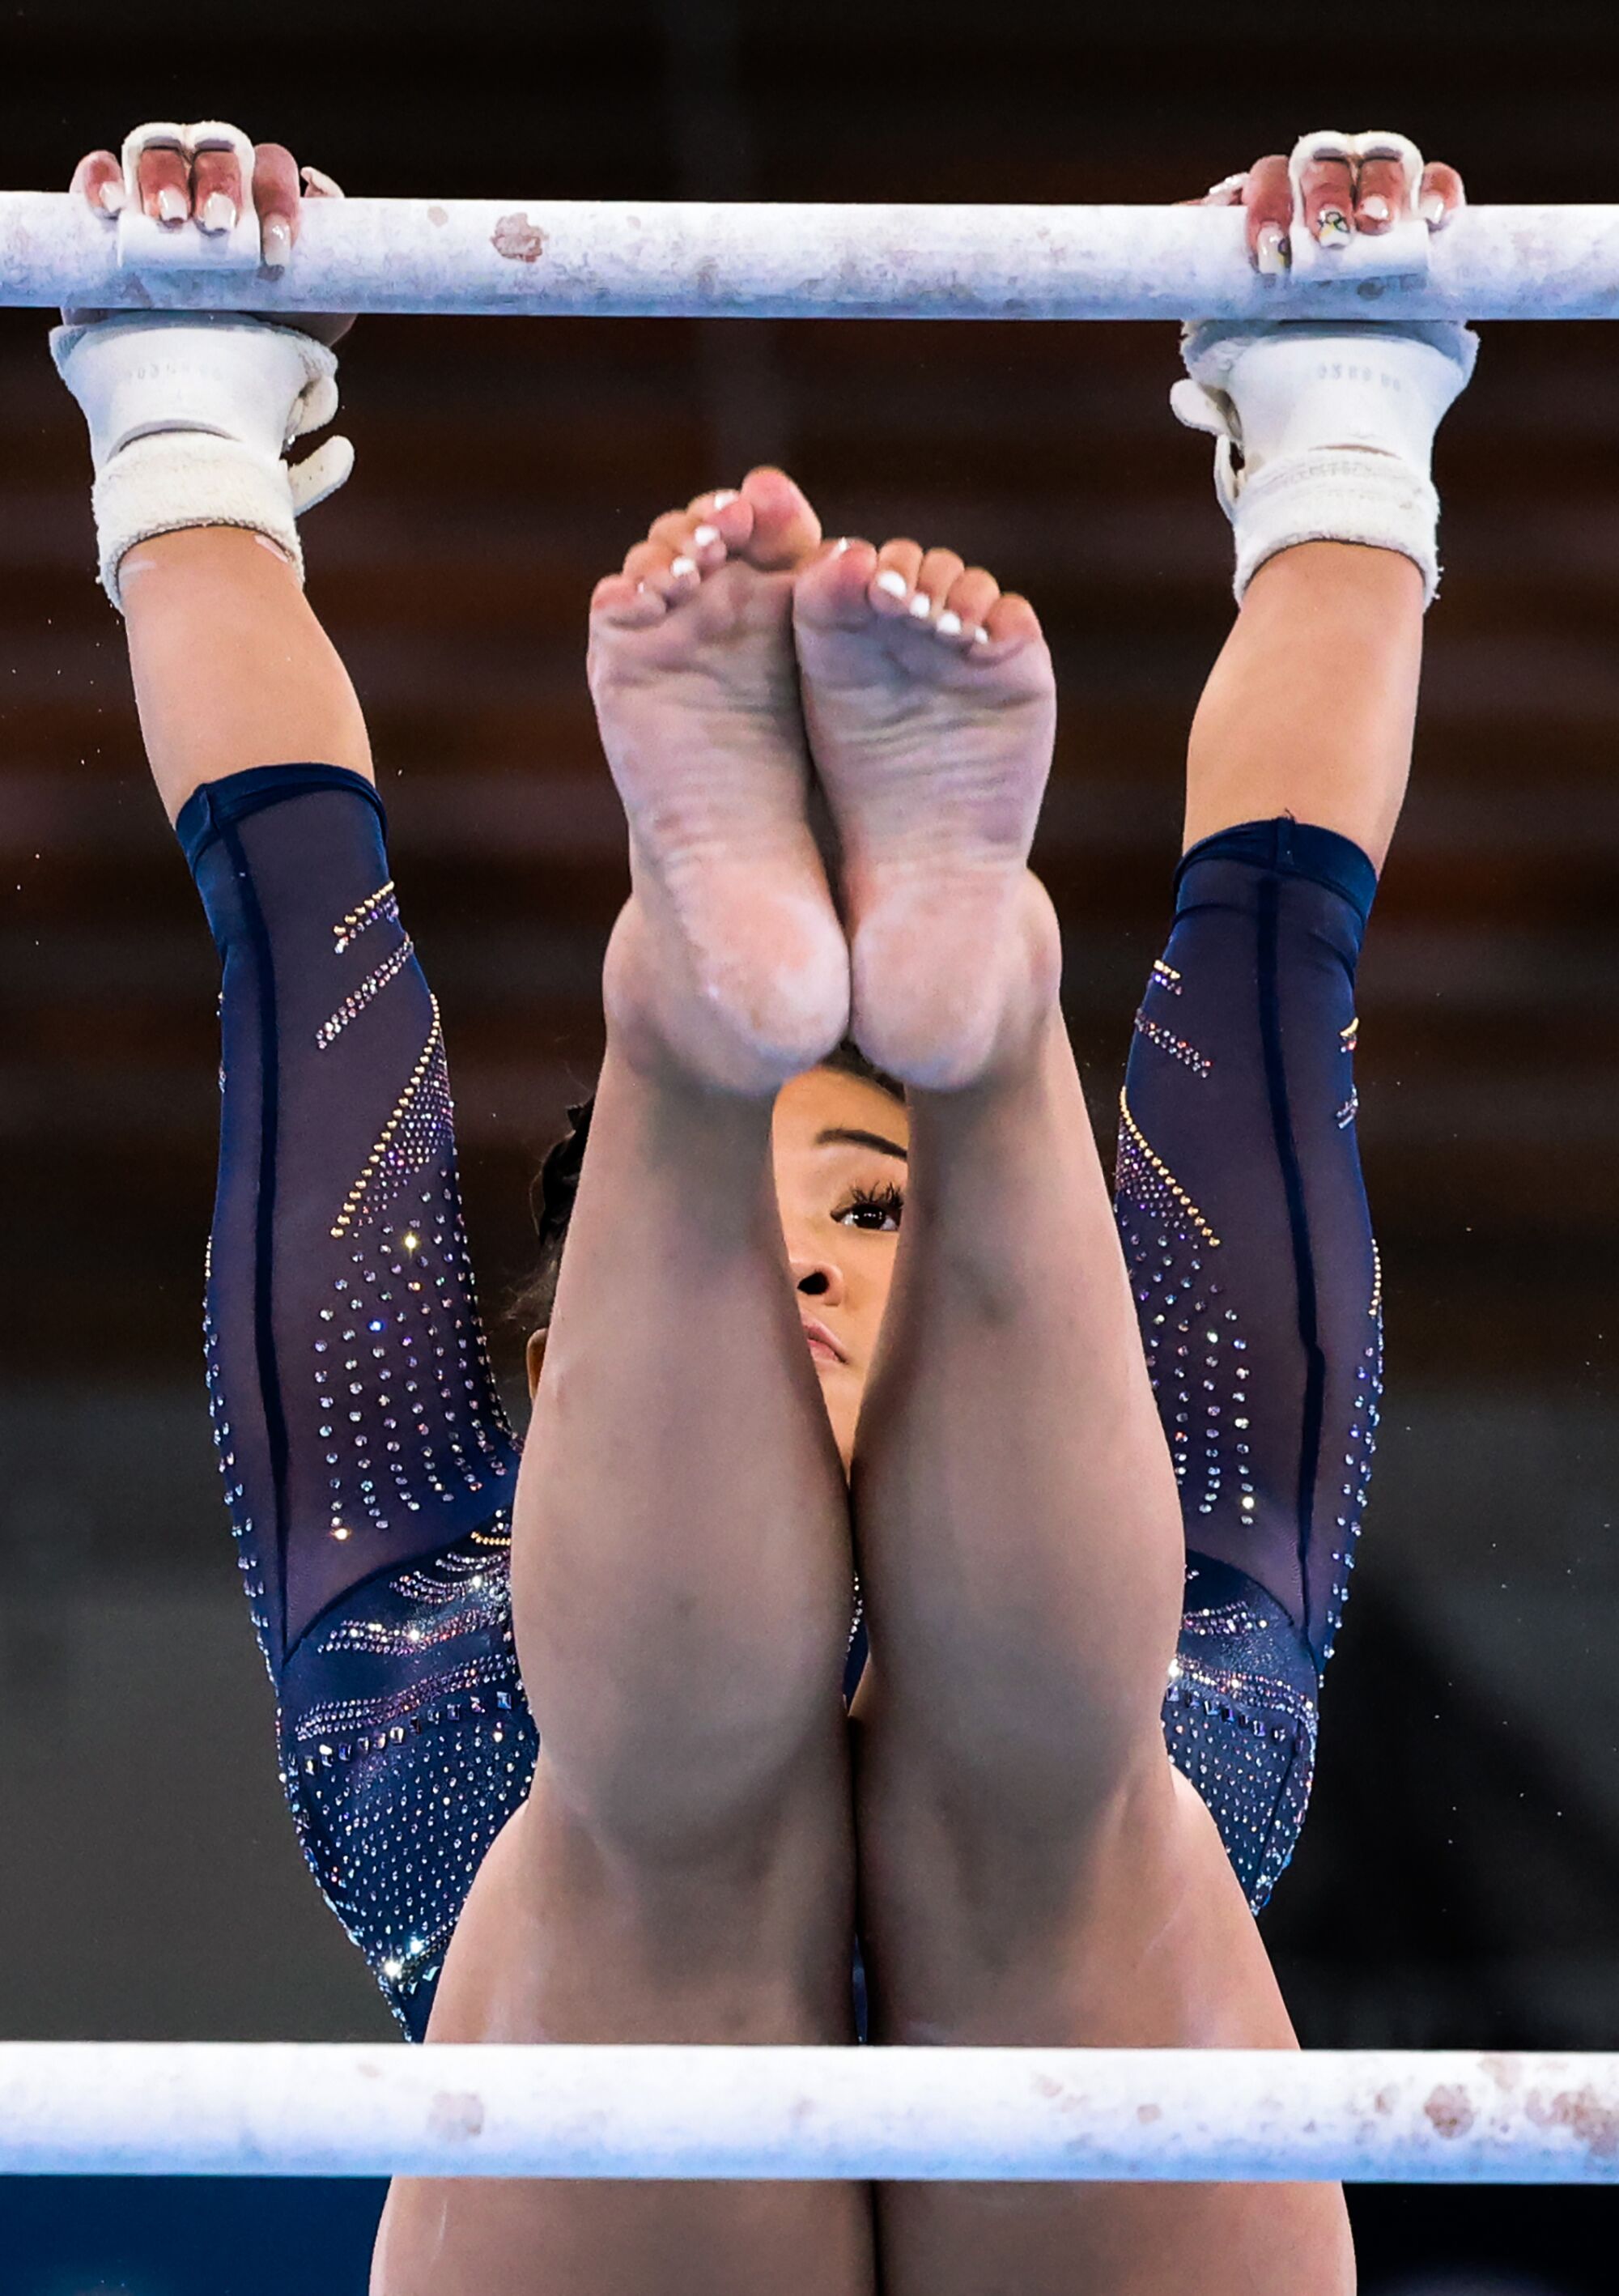 USA gymnast Sunisa Lee earns a Bronze Medal in the Uneven Bars